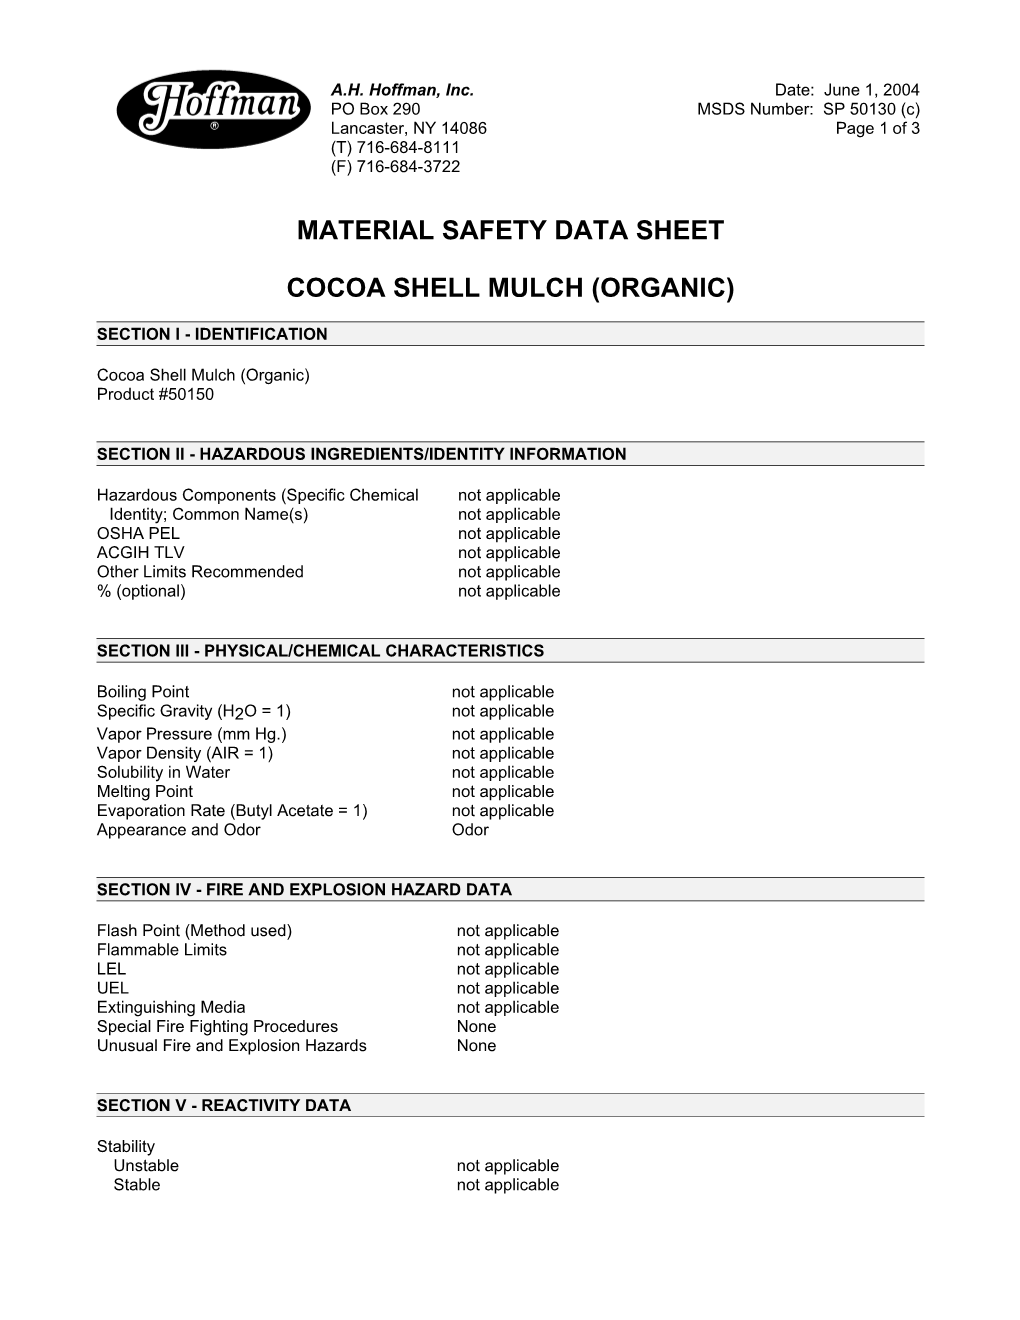 Material Safety Data Sheet s39